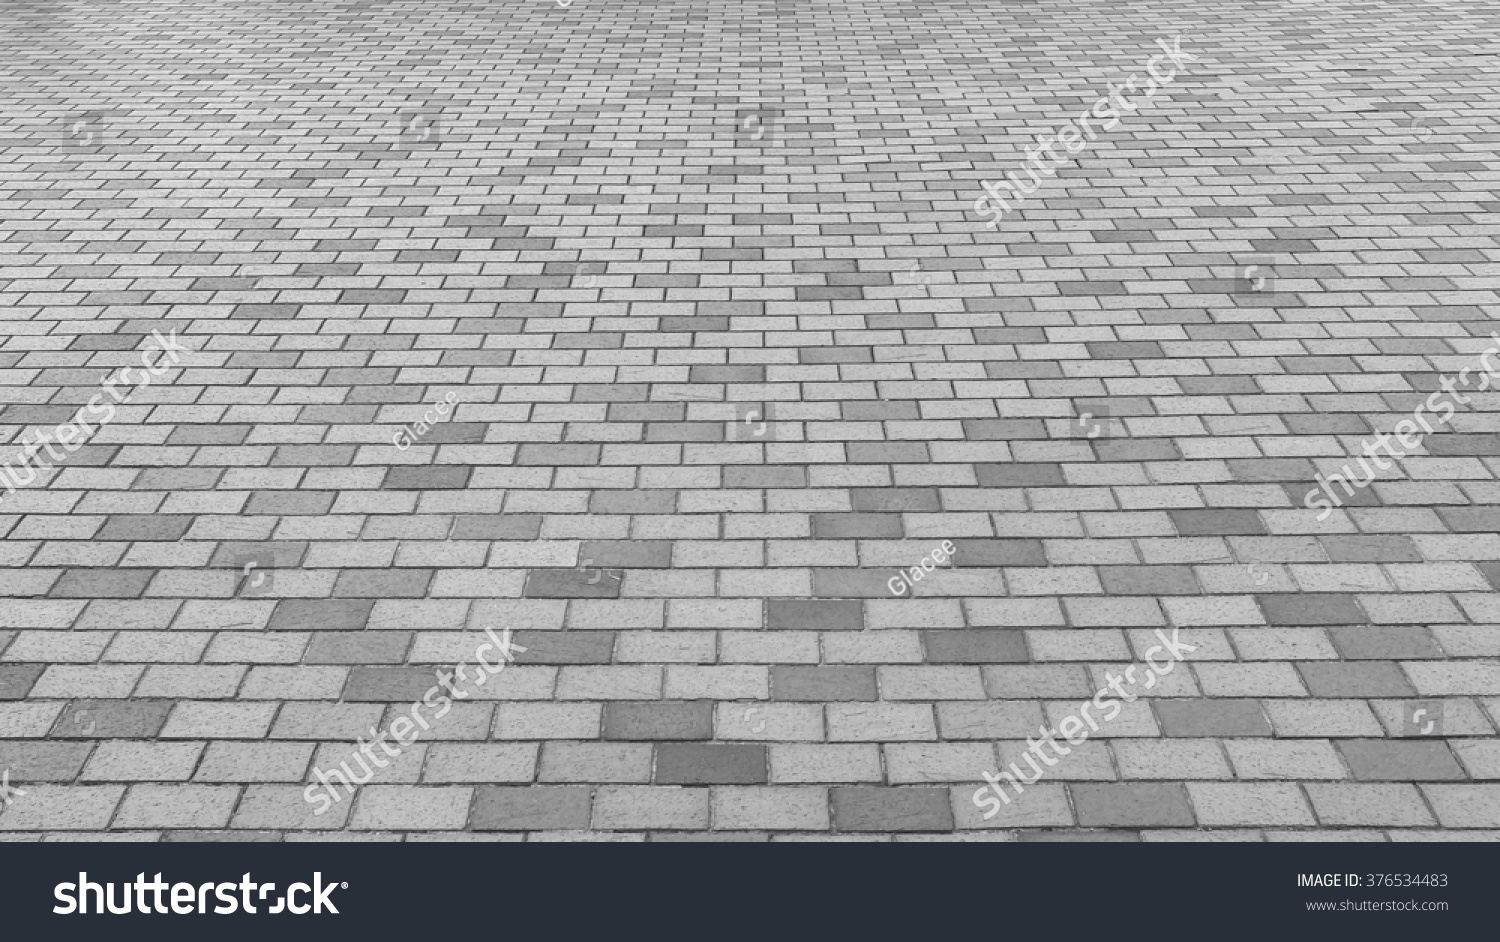 Perspective View Monotone Gray Brick Stone Pavement on The Ground for Street Road. Sidewalk, Driveway, Pavers, Pavement in Vintage Design Ground Flooring Square Pattern Texture Background for mock up #376534483